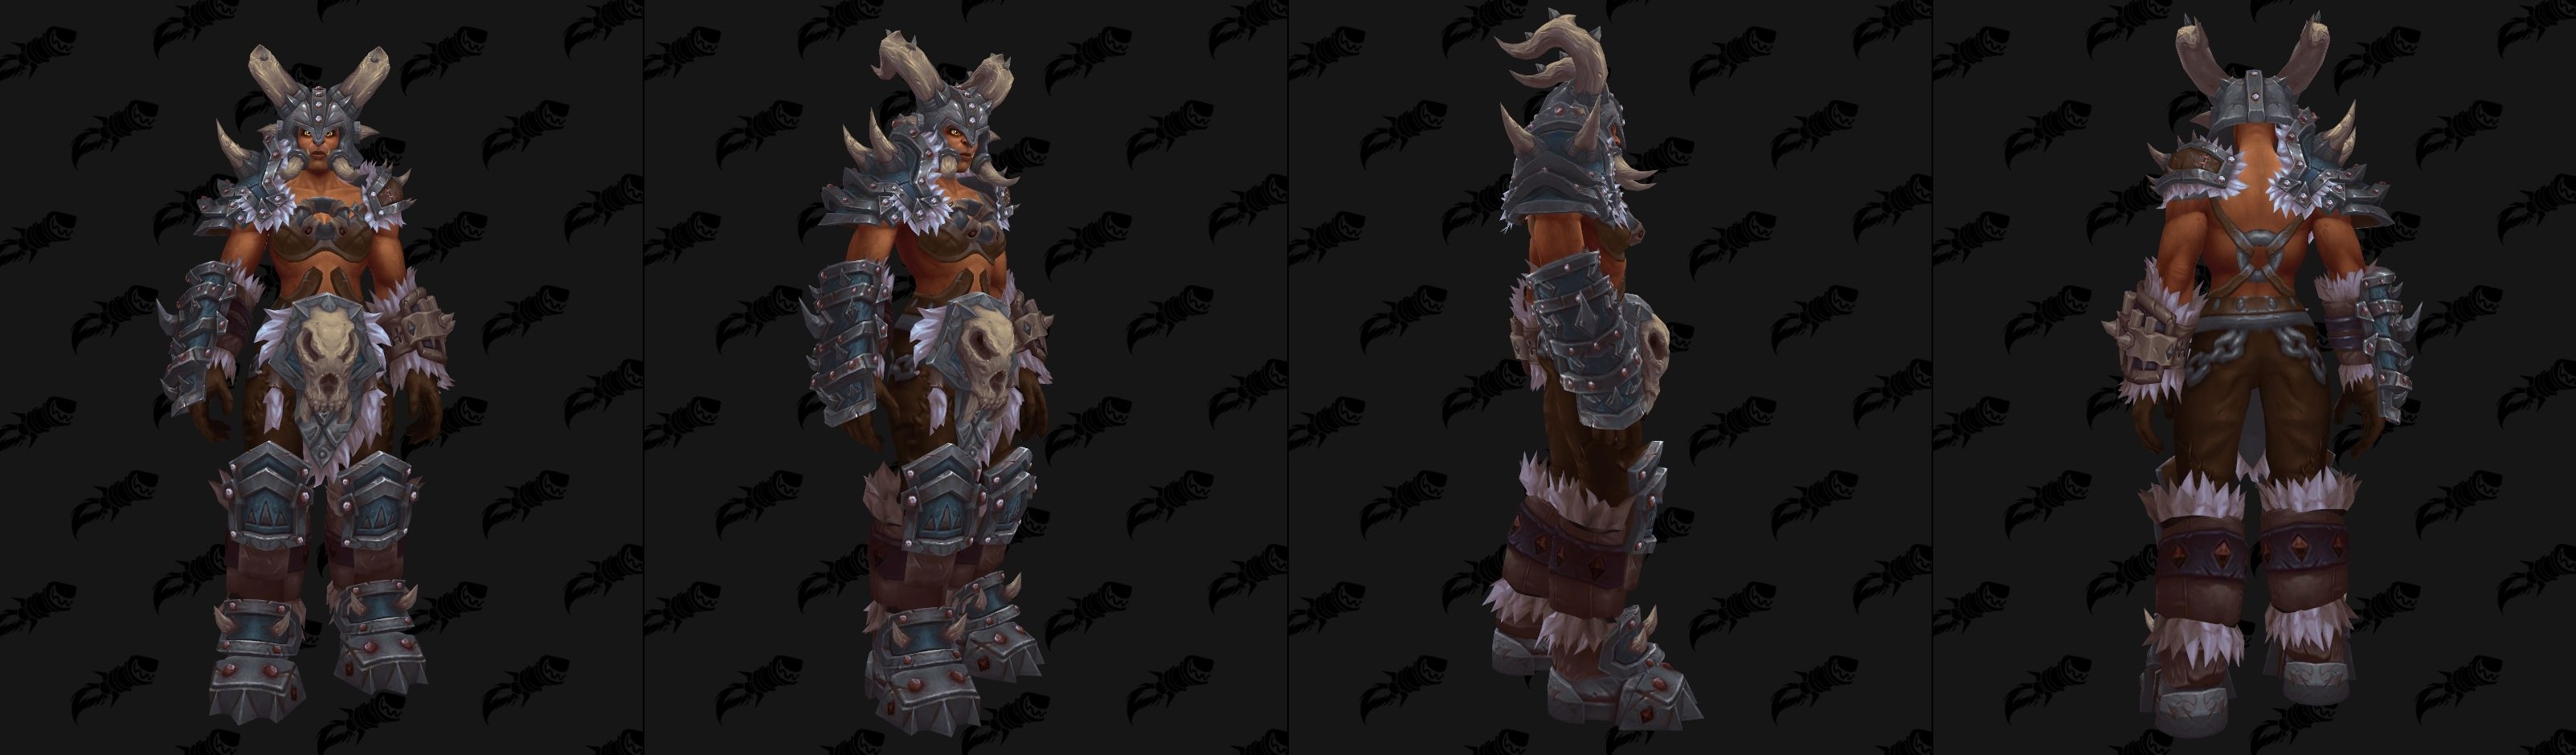 Mag Har Orc Allied Race Guides Wowhead